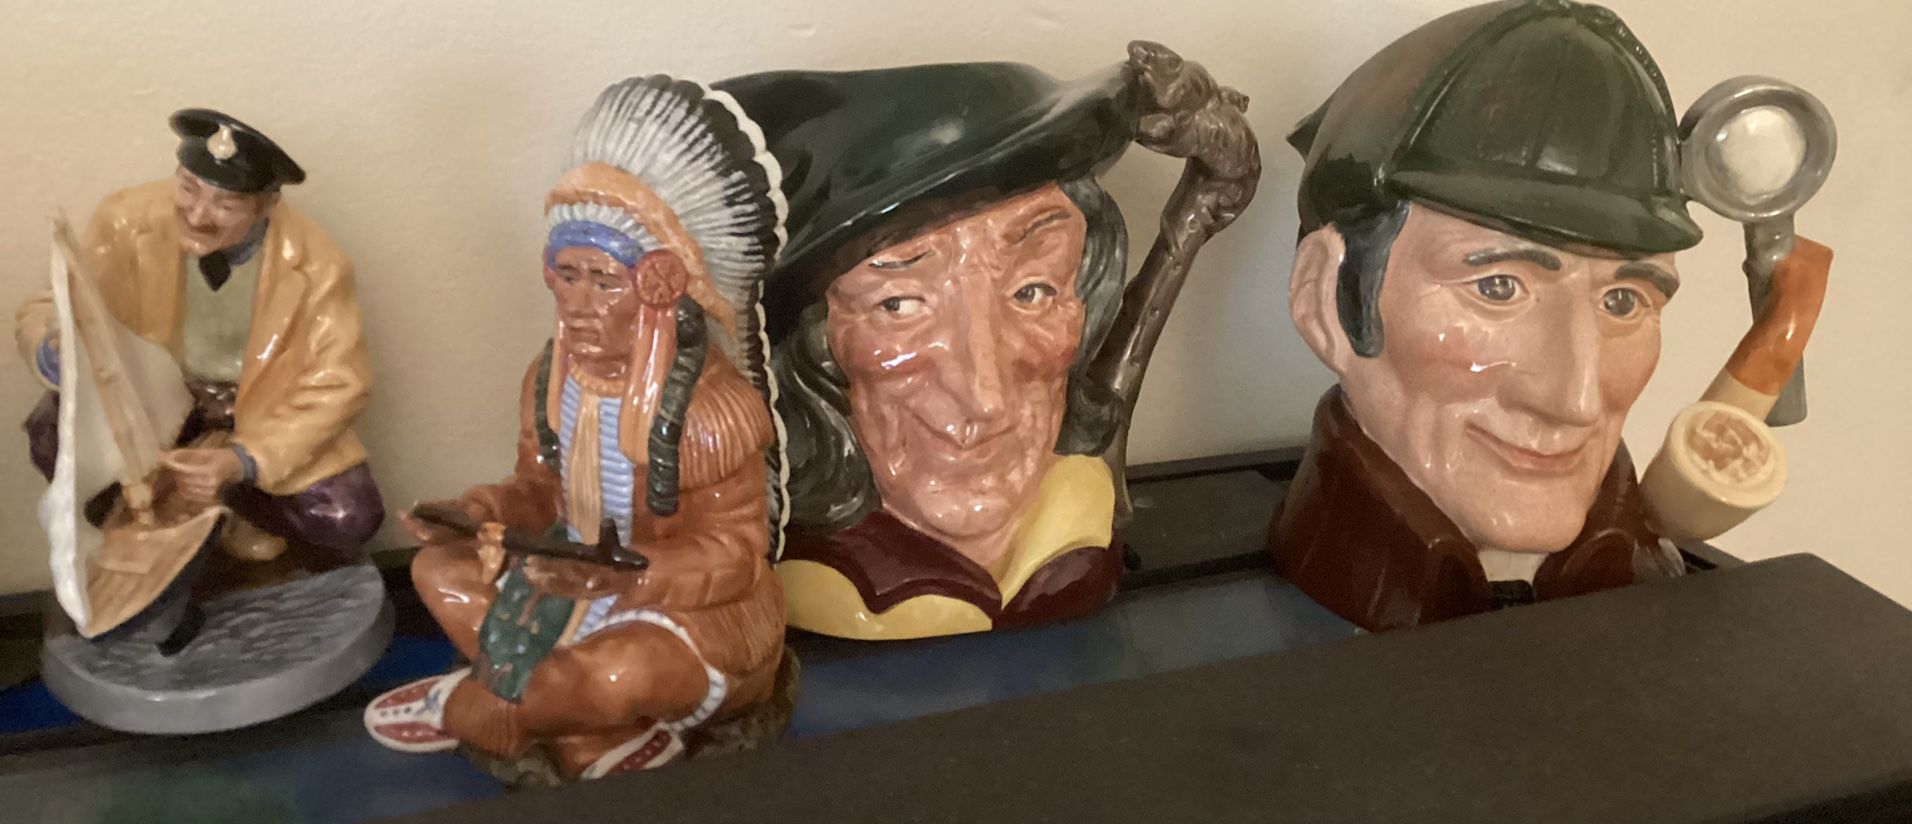 Royal Doulton Mugs and Figurines (some with signatures)